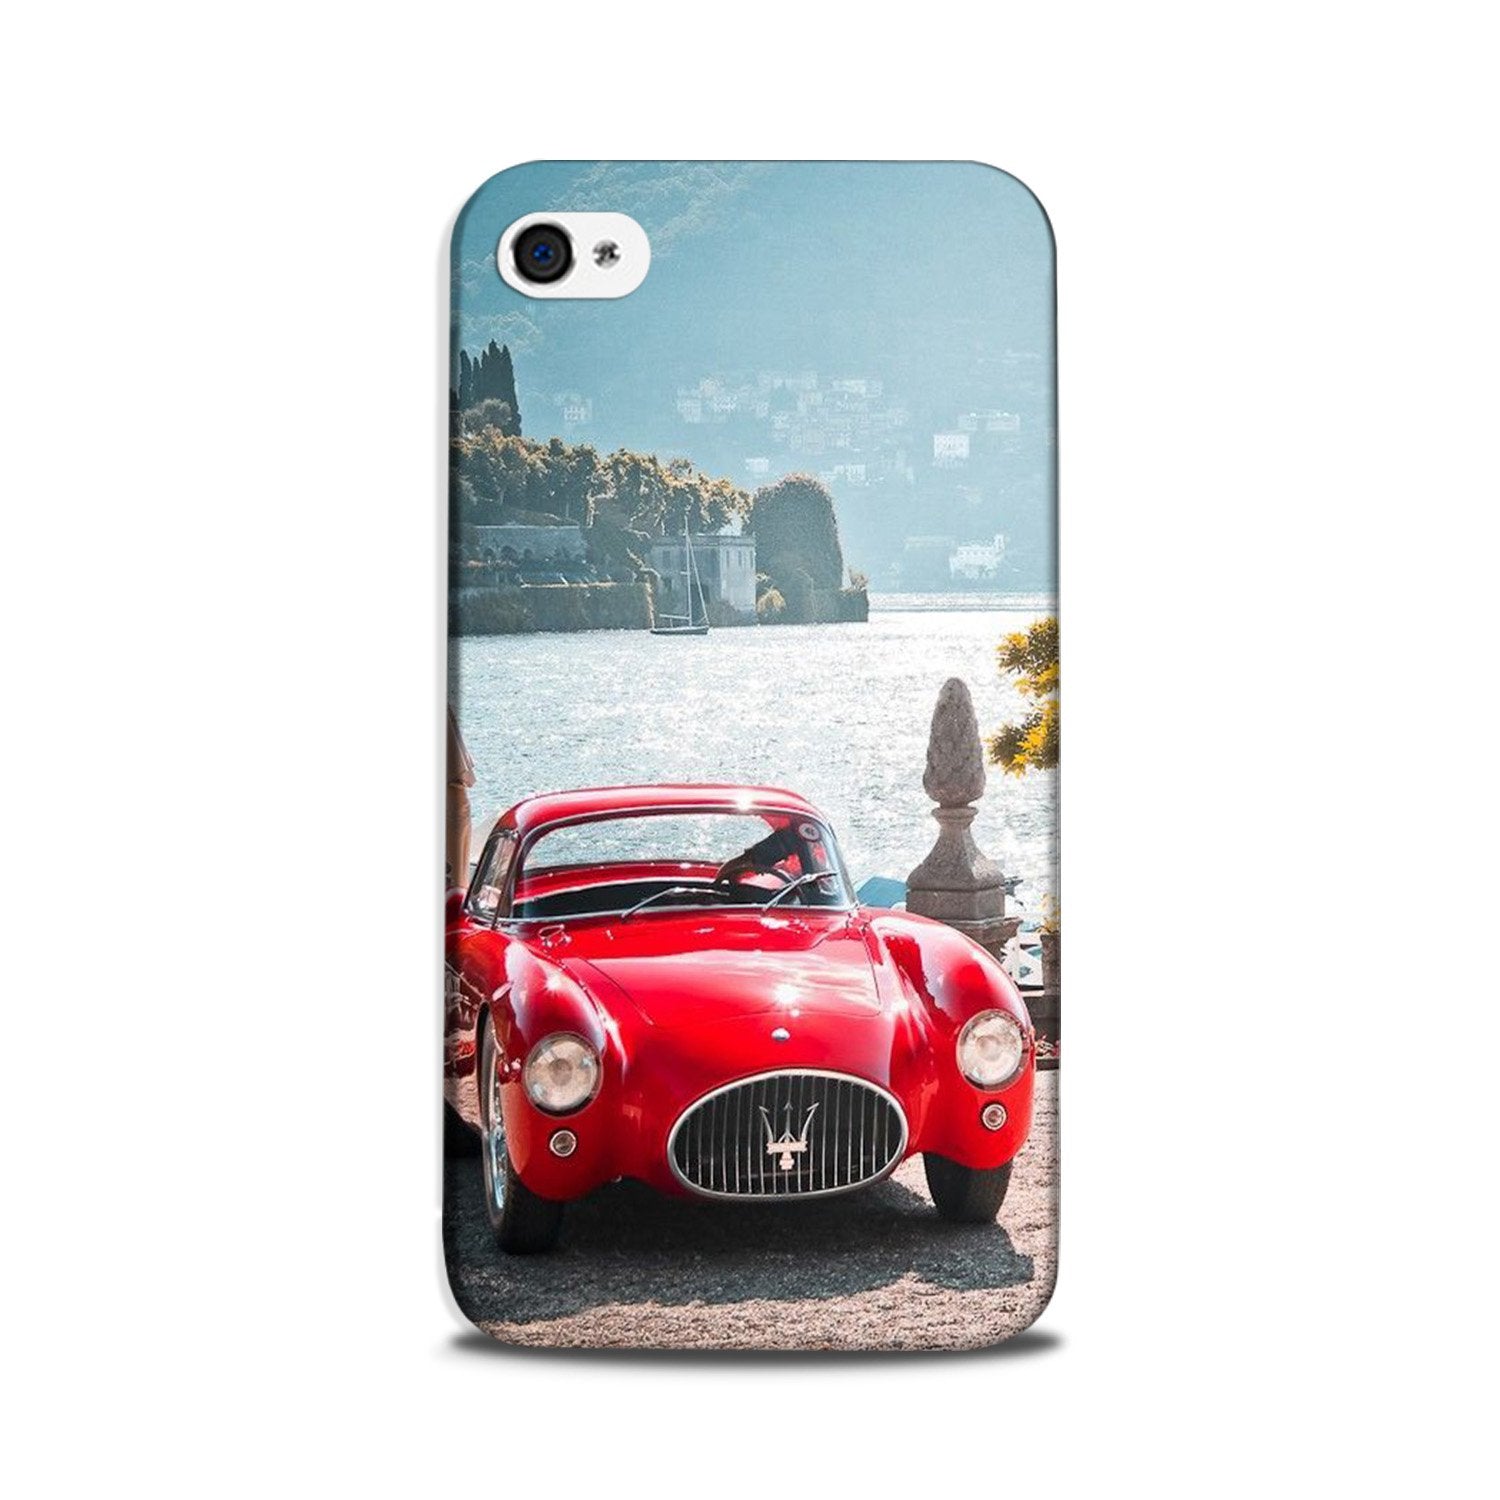 Vintage Car Case for iPhone 5/ 5s